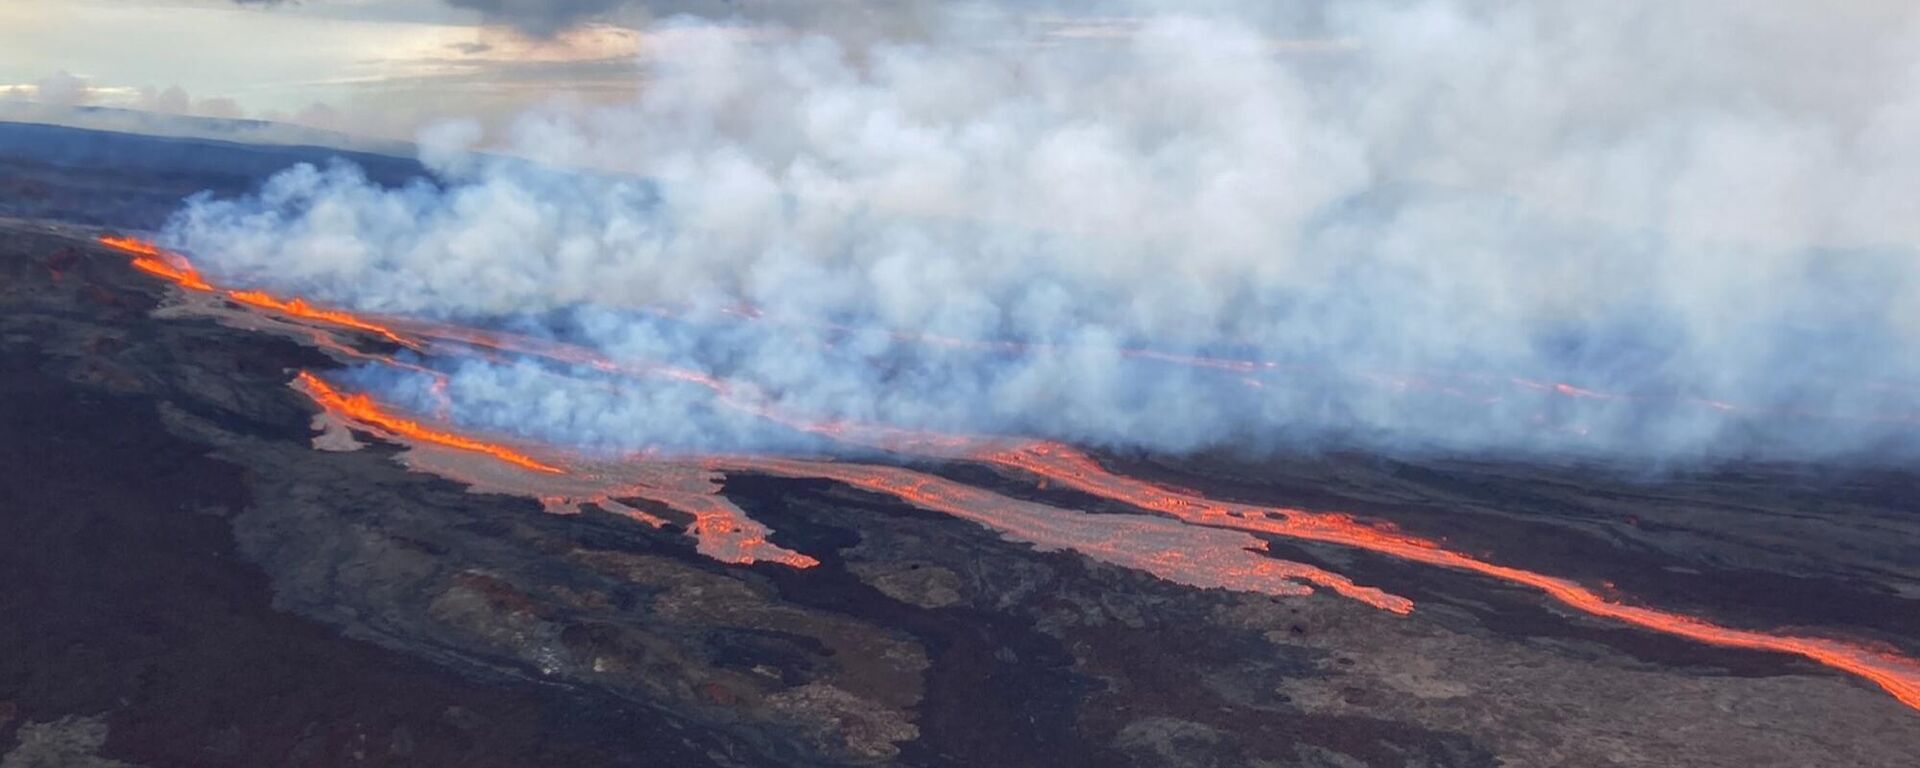 In this aerial photo released by the U.S. Geological Survey, the Mauna Loa volcano is seen erupting from vents on the Northeast Rift Zone on the Big Island of Hawaii, Monday, Nov. 28, 2022. Hawaii's Mauna Loa, the world's largest active volcano, began spewing ash and debris from its summit, prompting civil defense officials to warn residents on Monday to prepare in case the eruption causes lava to flow toward communities. - Sputnik International, 1920, 02.12.2022